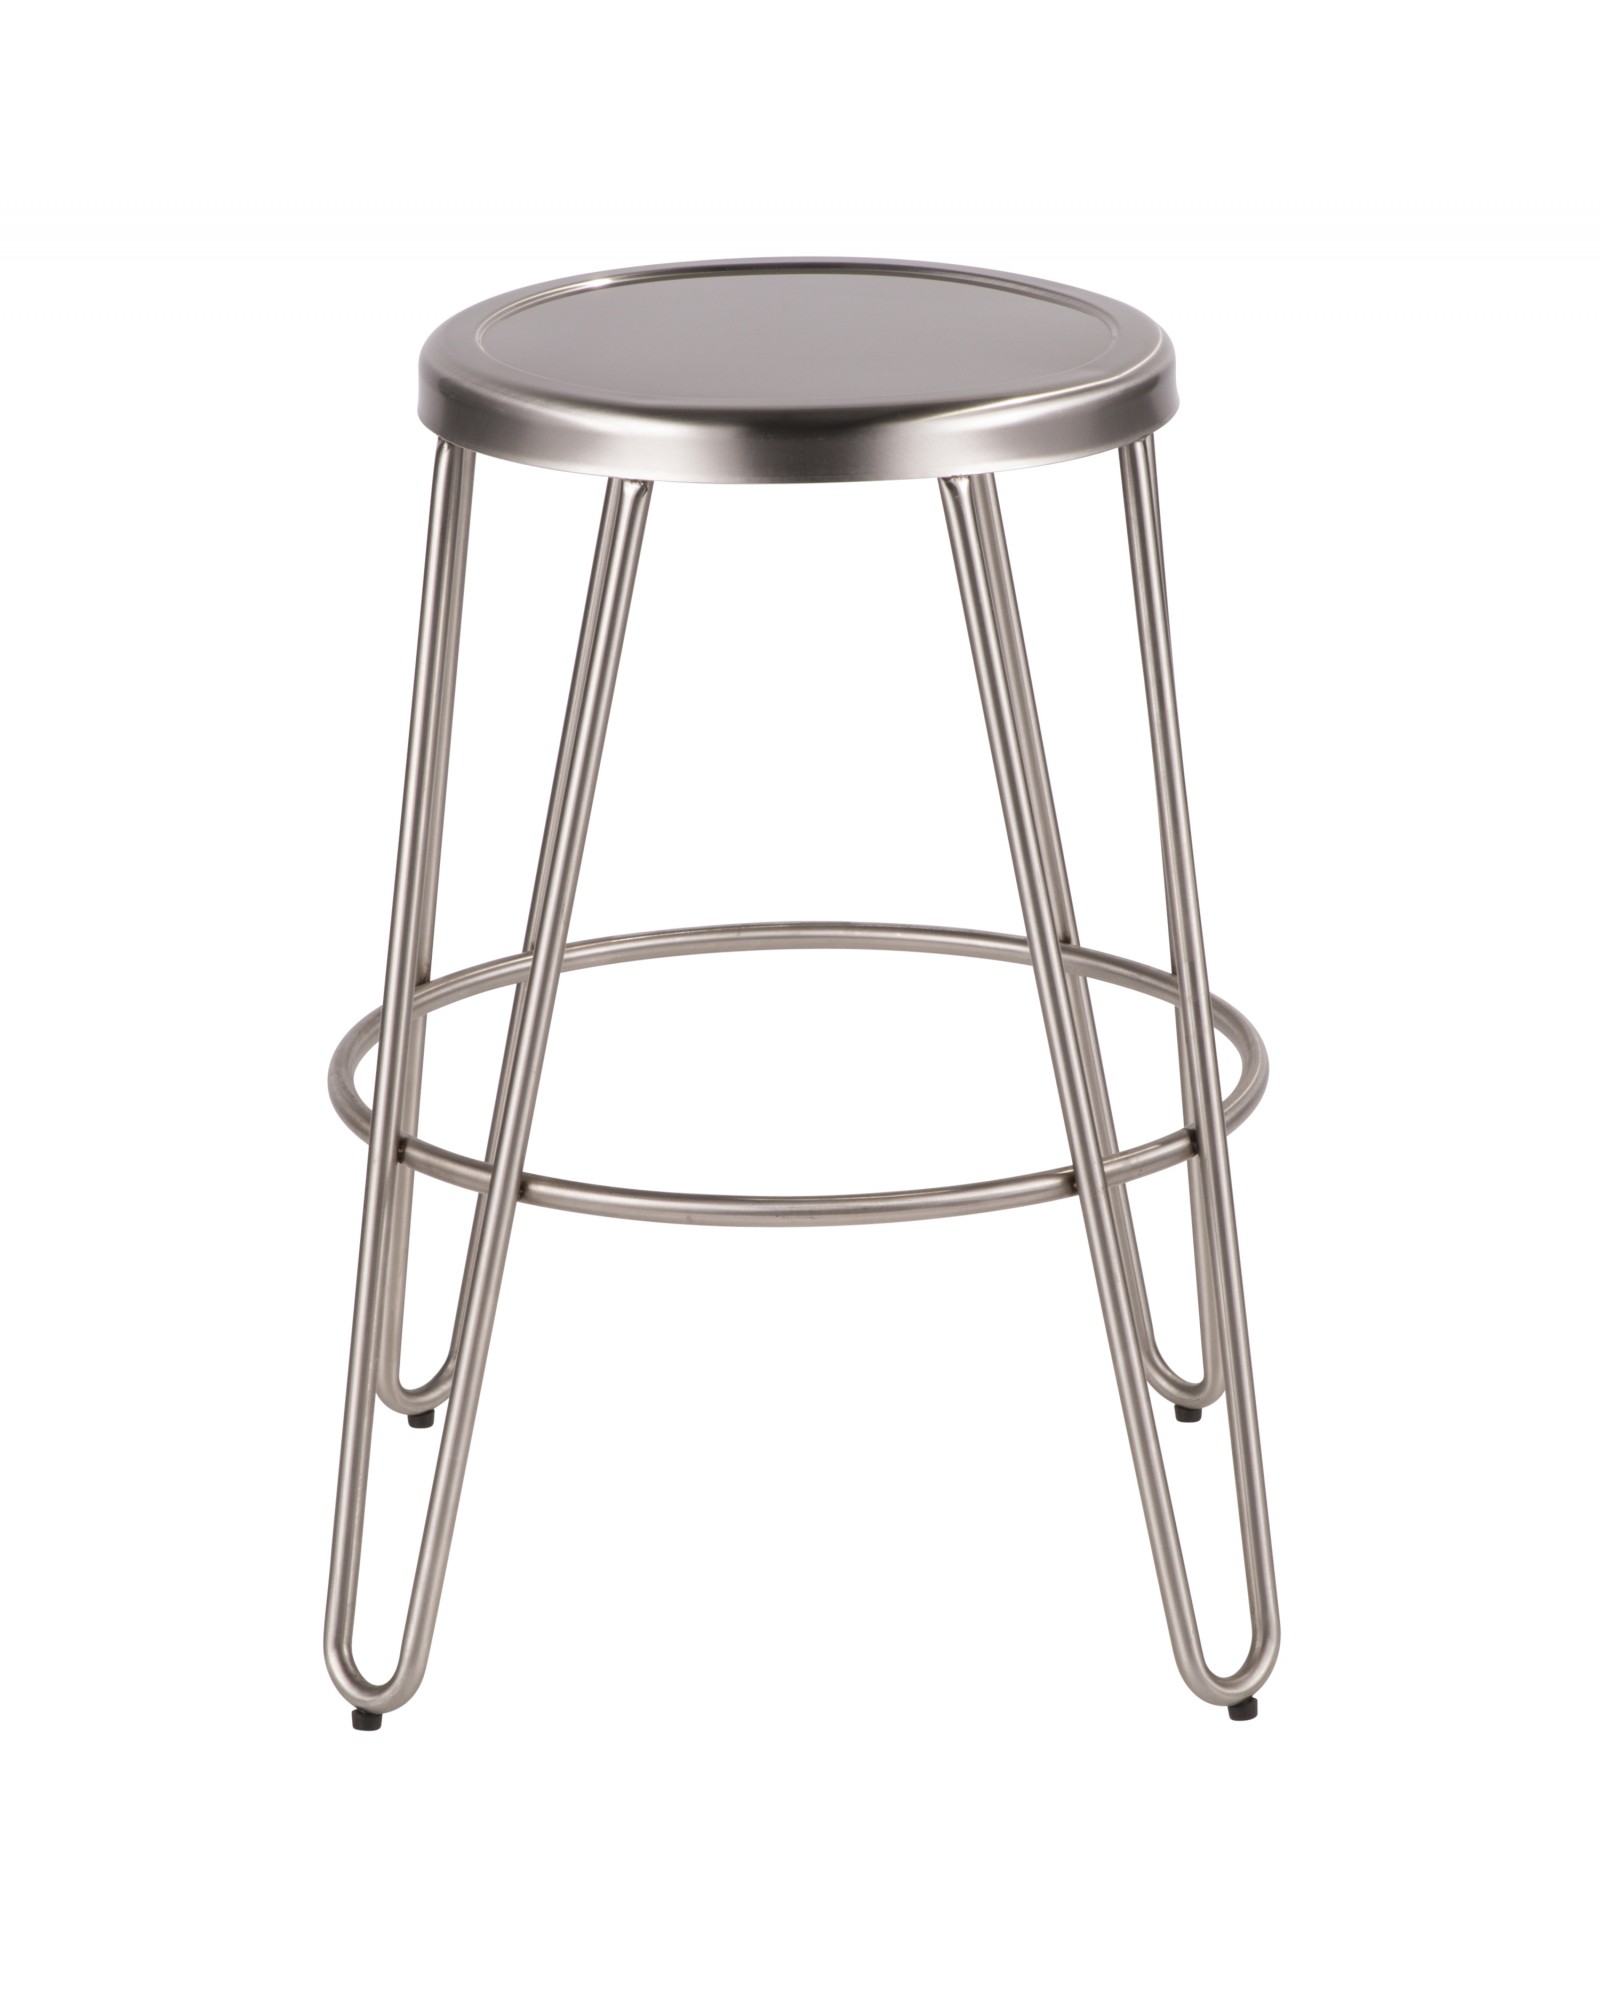 Avery Industrial Metal Counter Stool in Brushed Stainless Steel - Set of 2